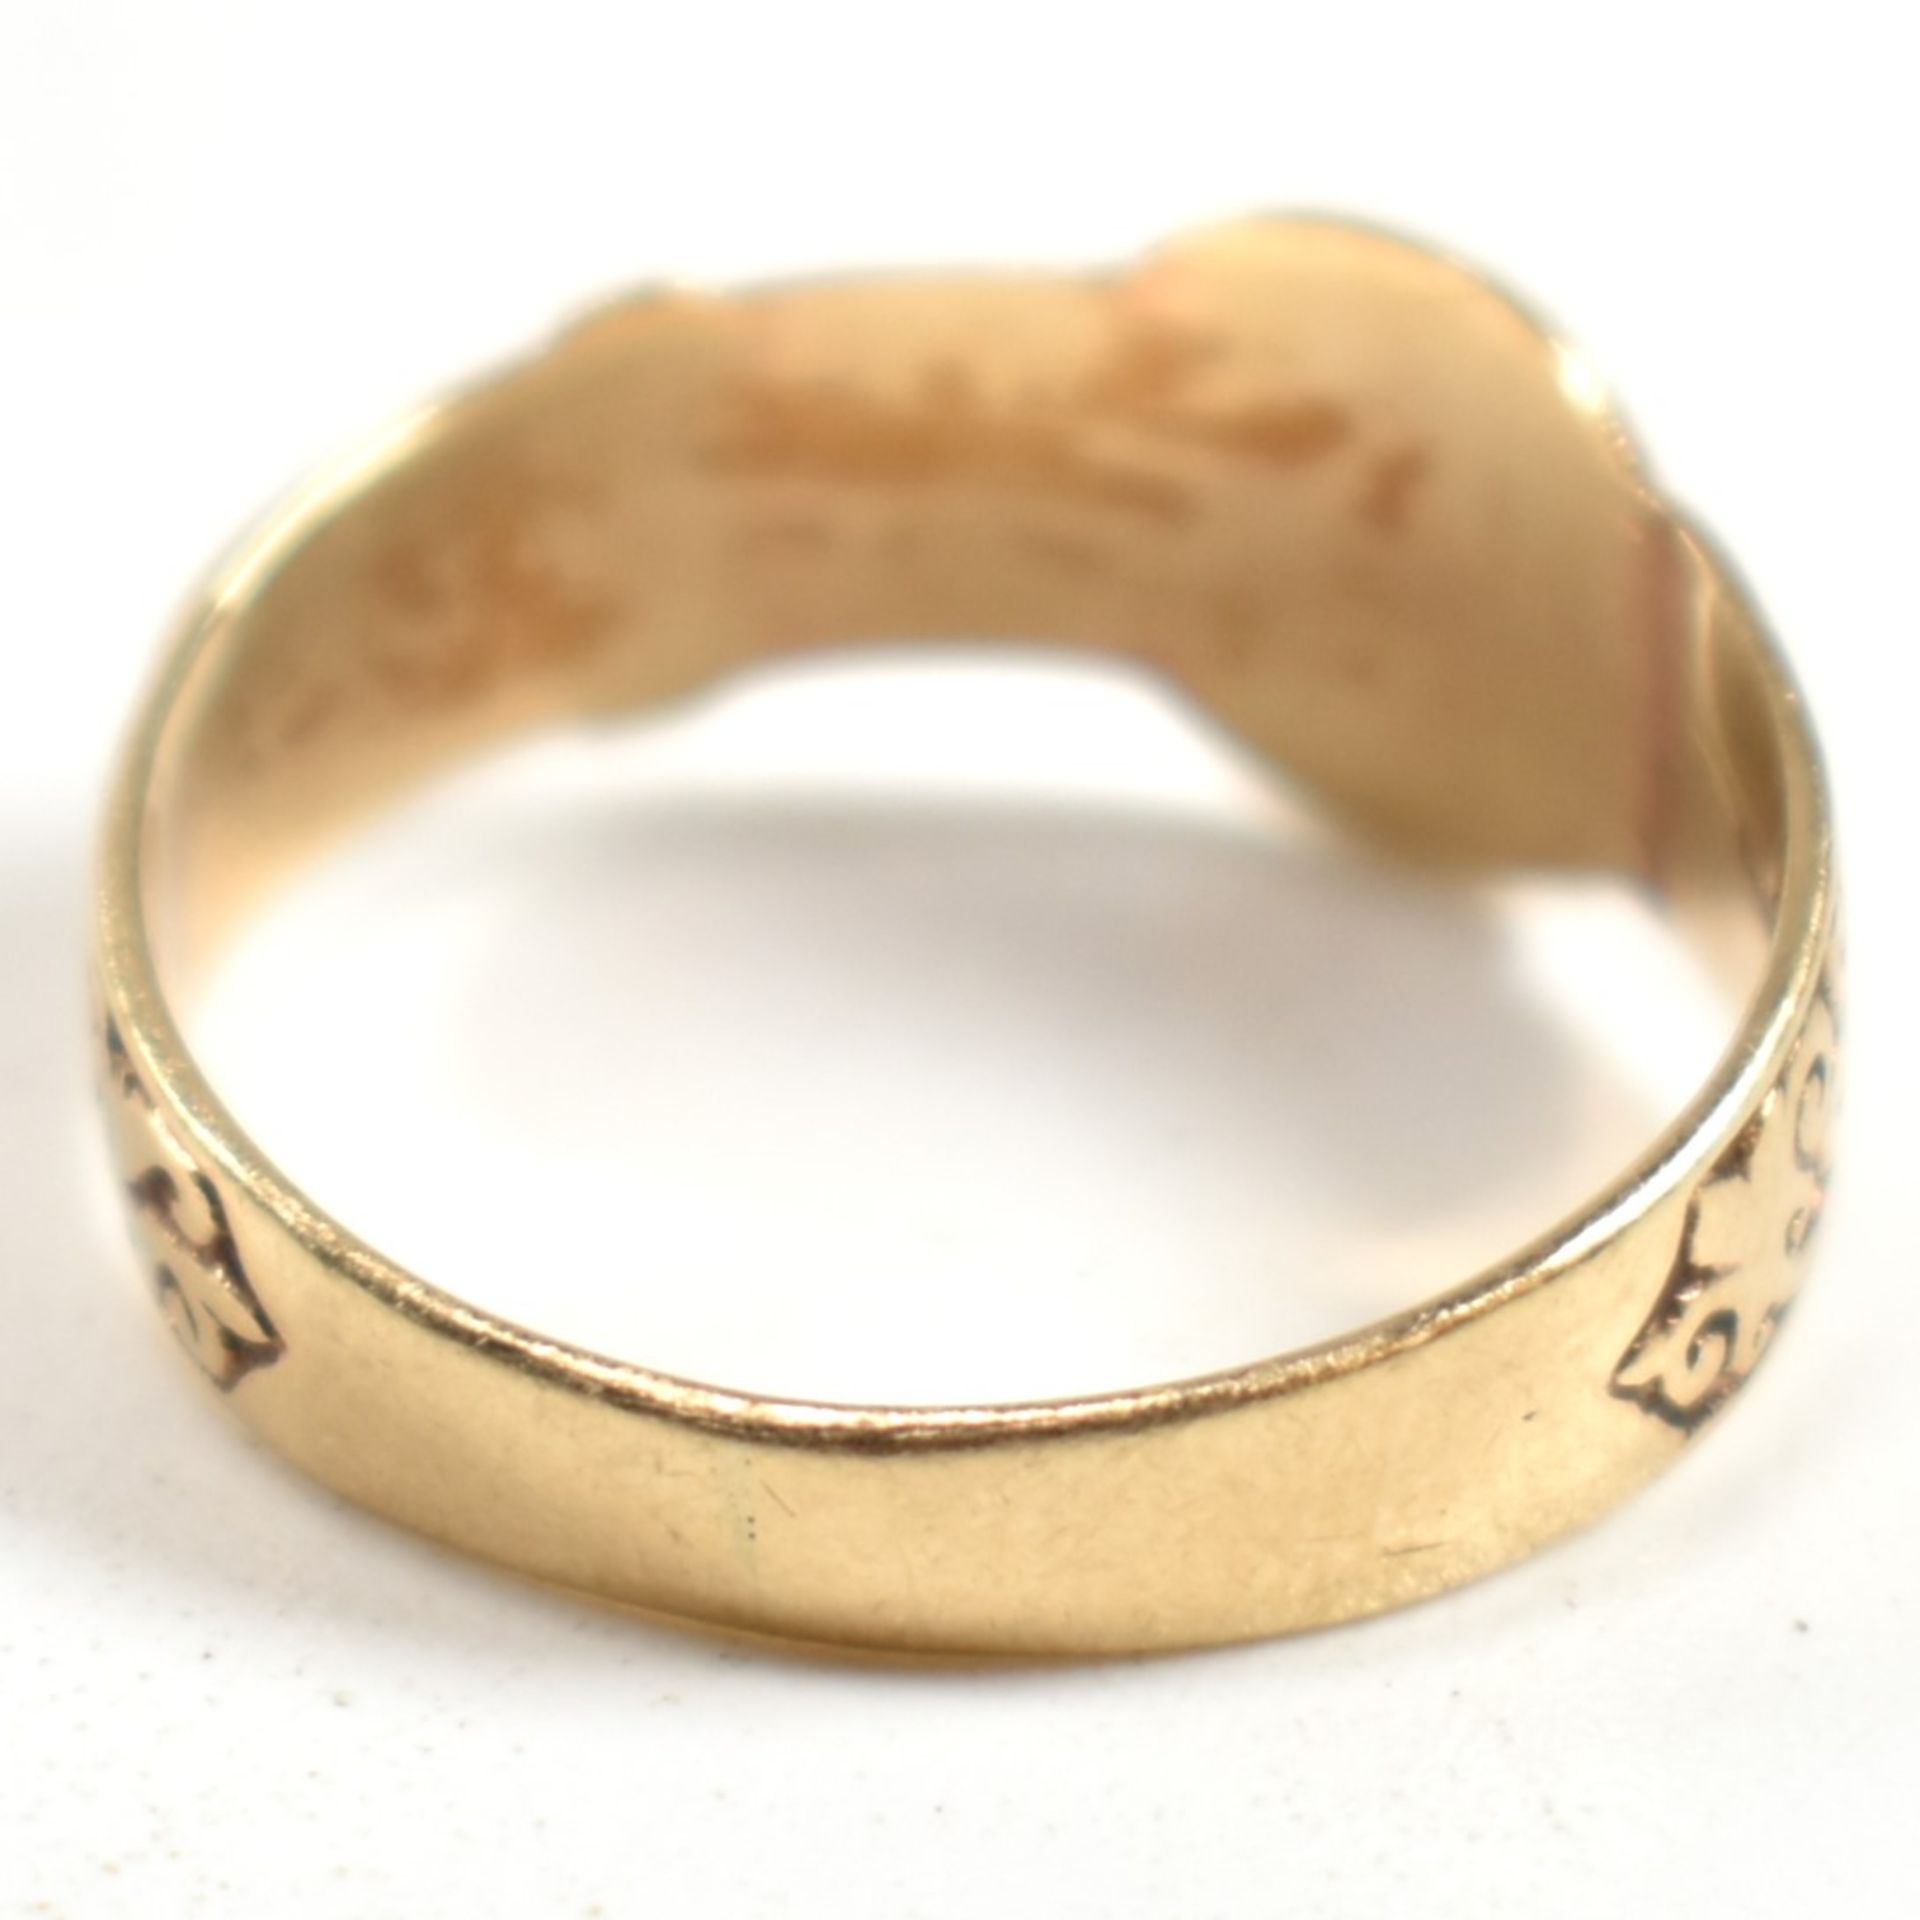 HALLMARKED 9CT GOLD ENGRAVED BELT BUCKLE RING - Image 2 of 9